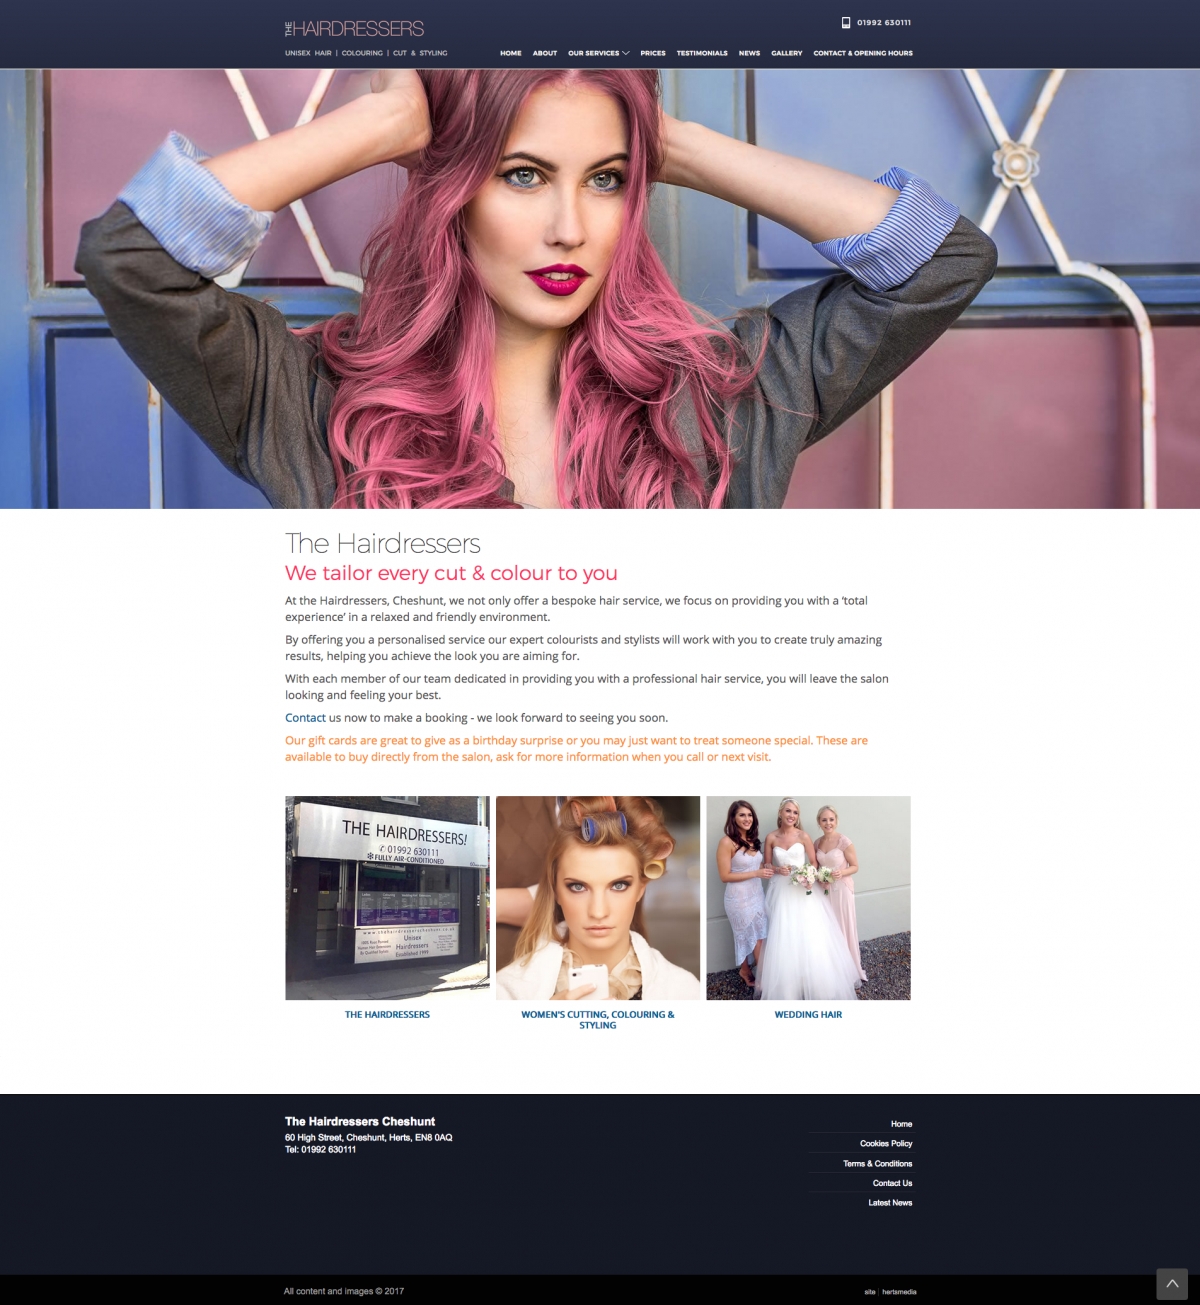 The Hairdressers - Cheshunt Stunning new website for this well known local business